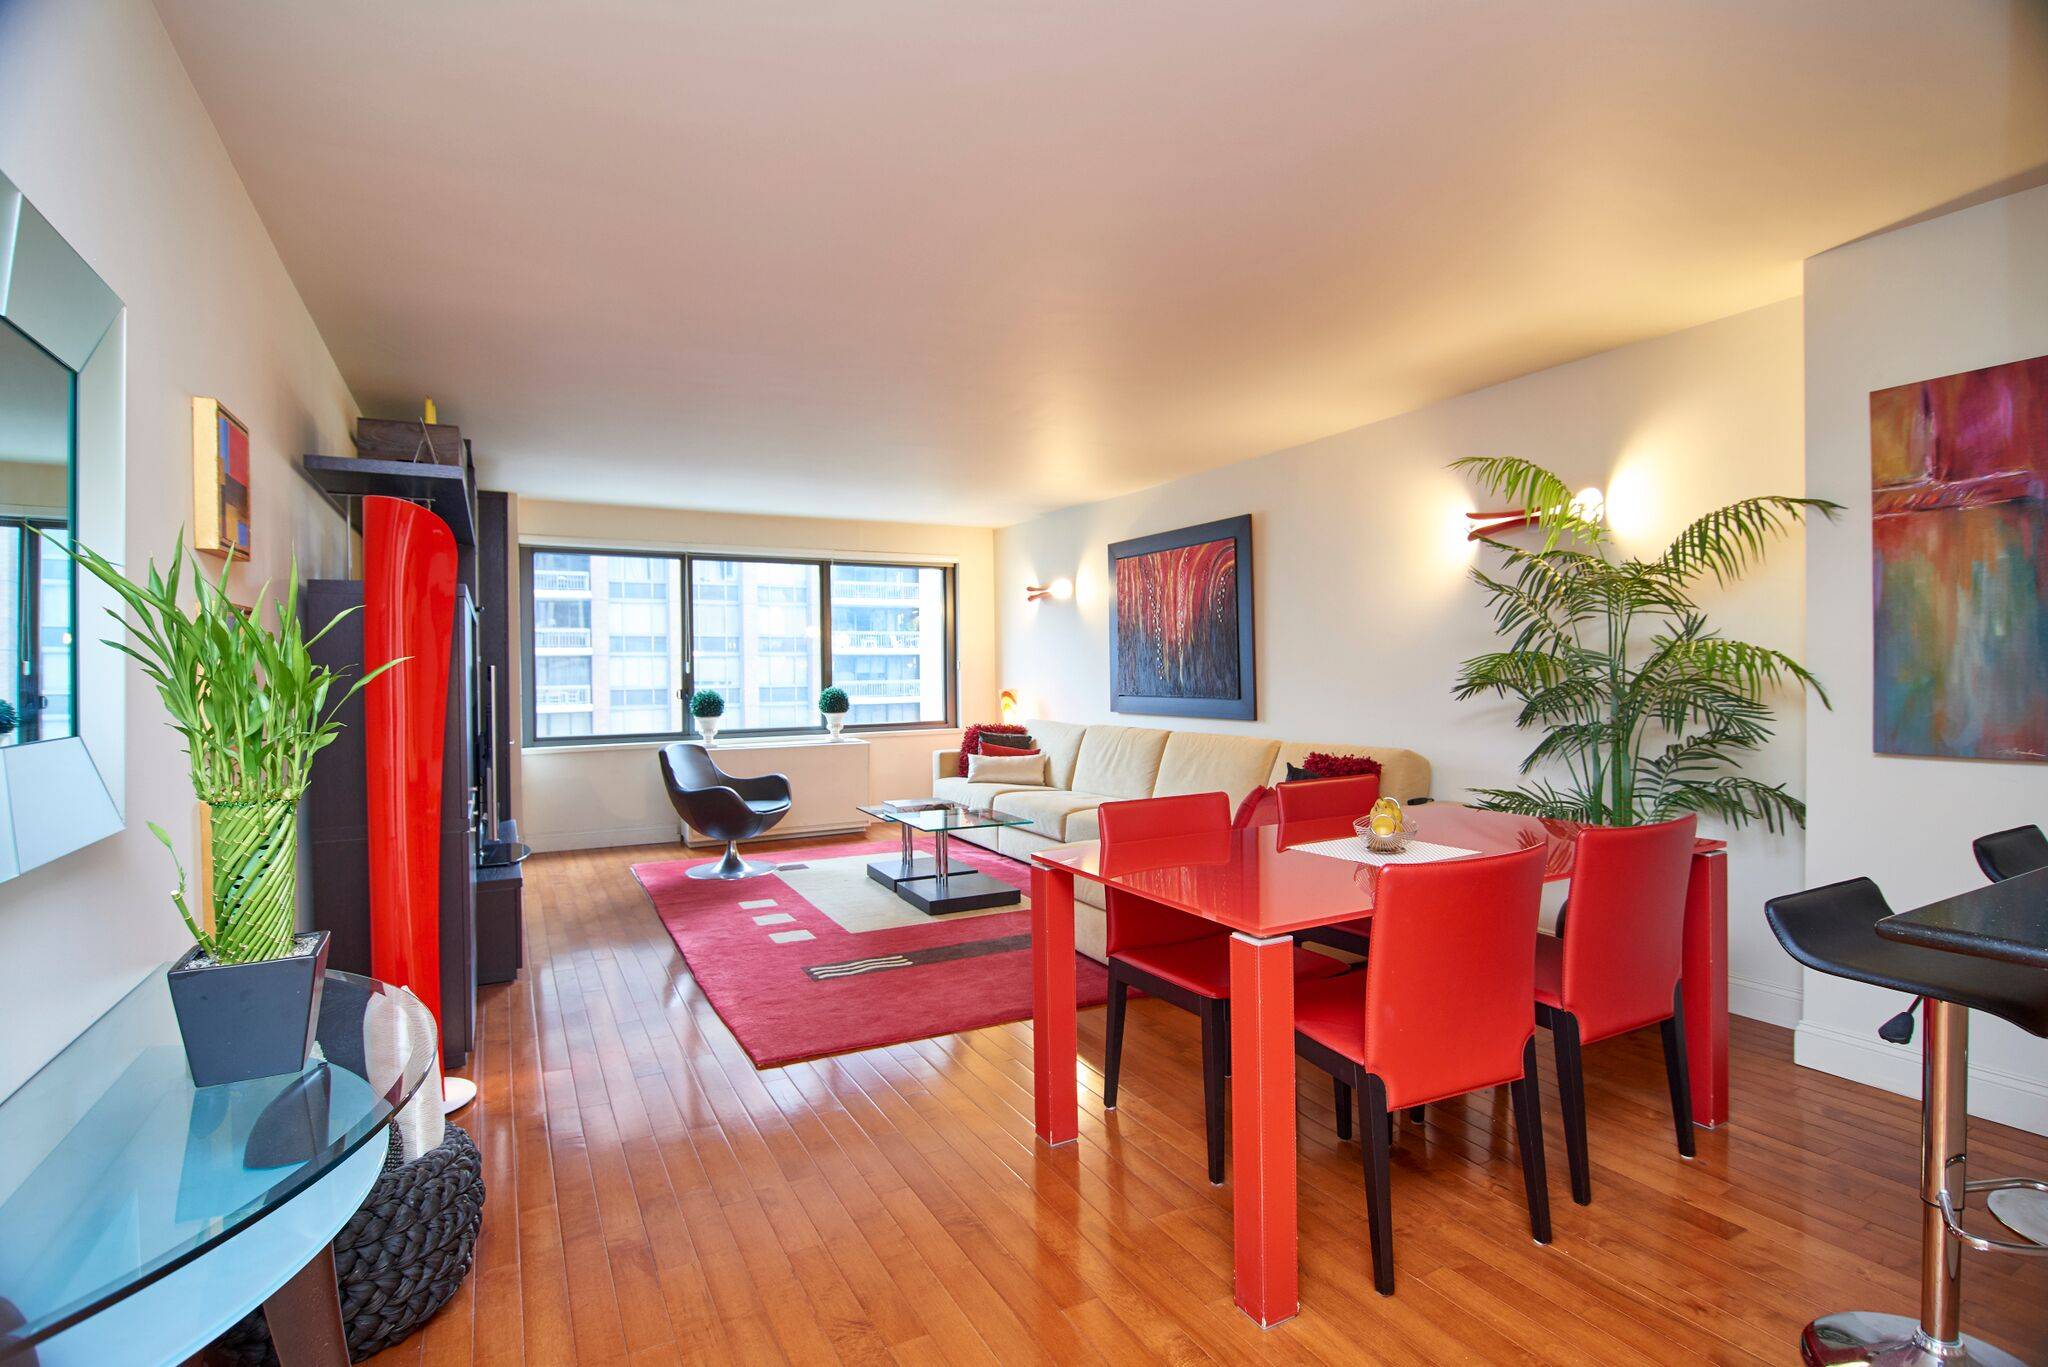 BEAUTIFUL ONE BEDROOM APARTMENT IN SUTTON PLACE/LUXURY FULL SERVICE BUILDING